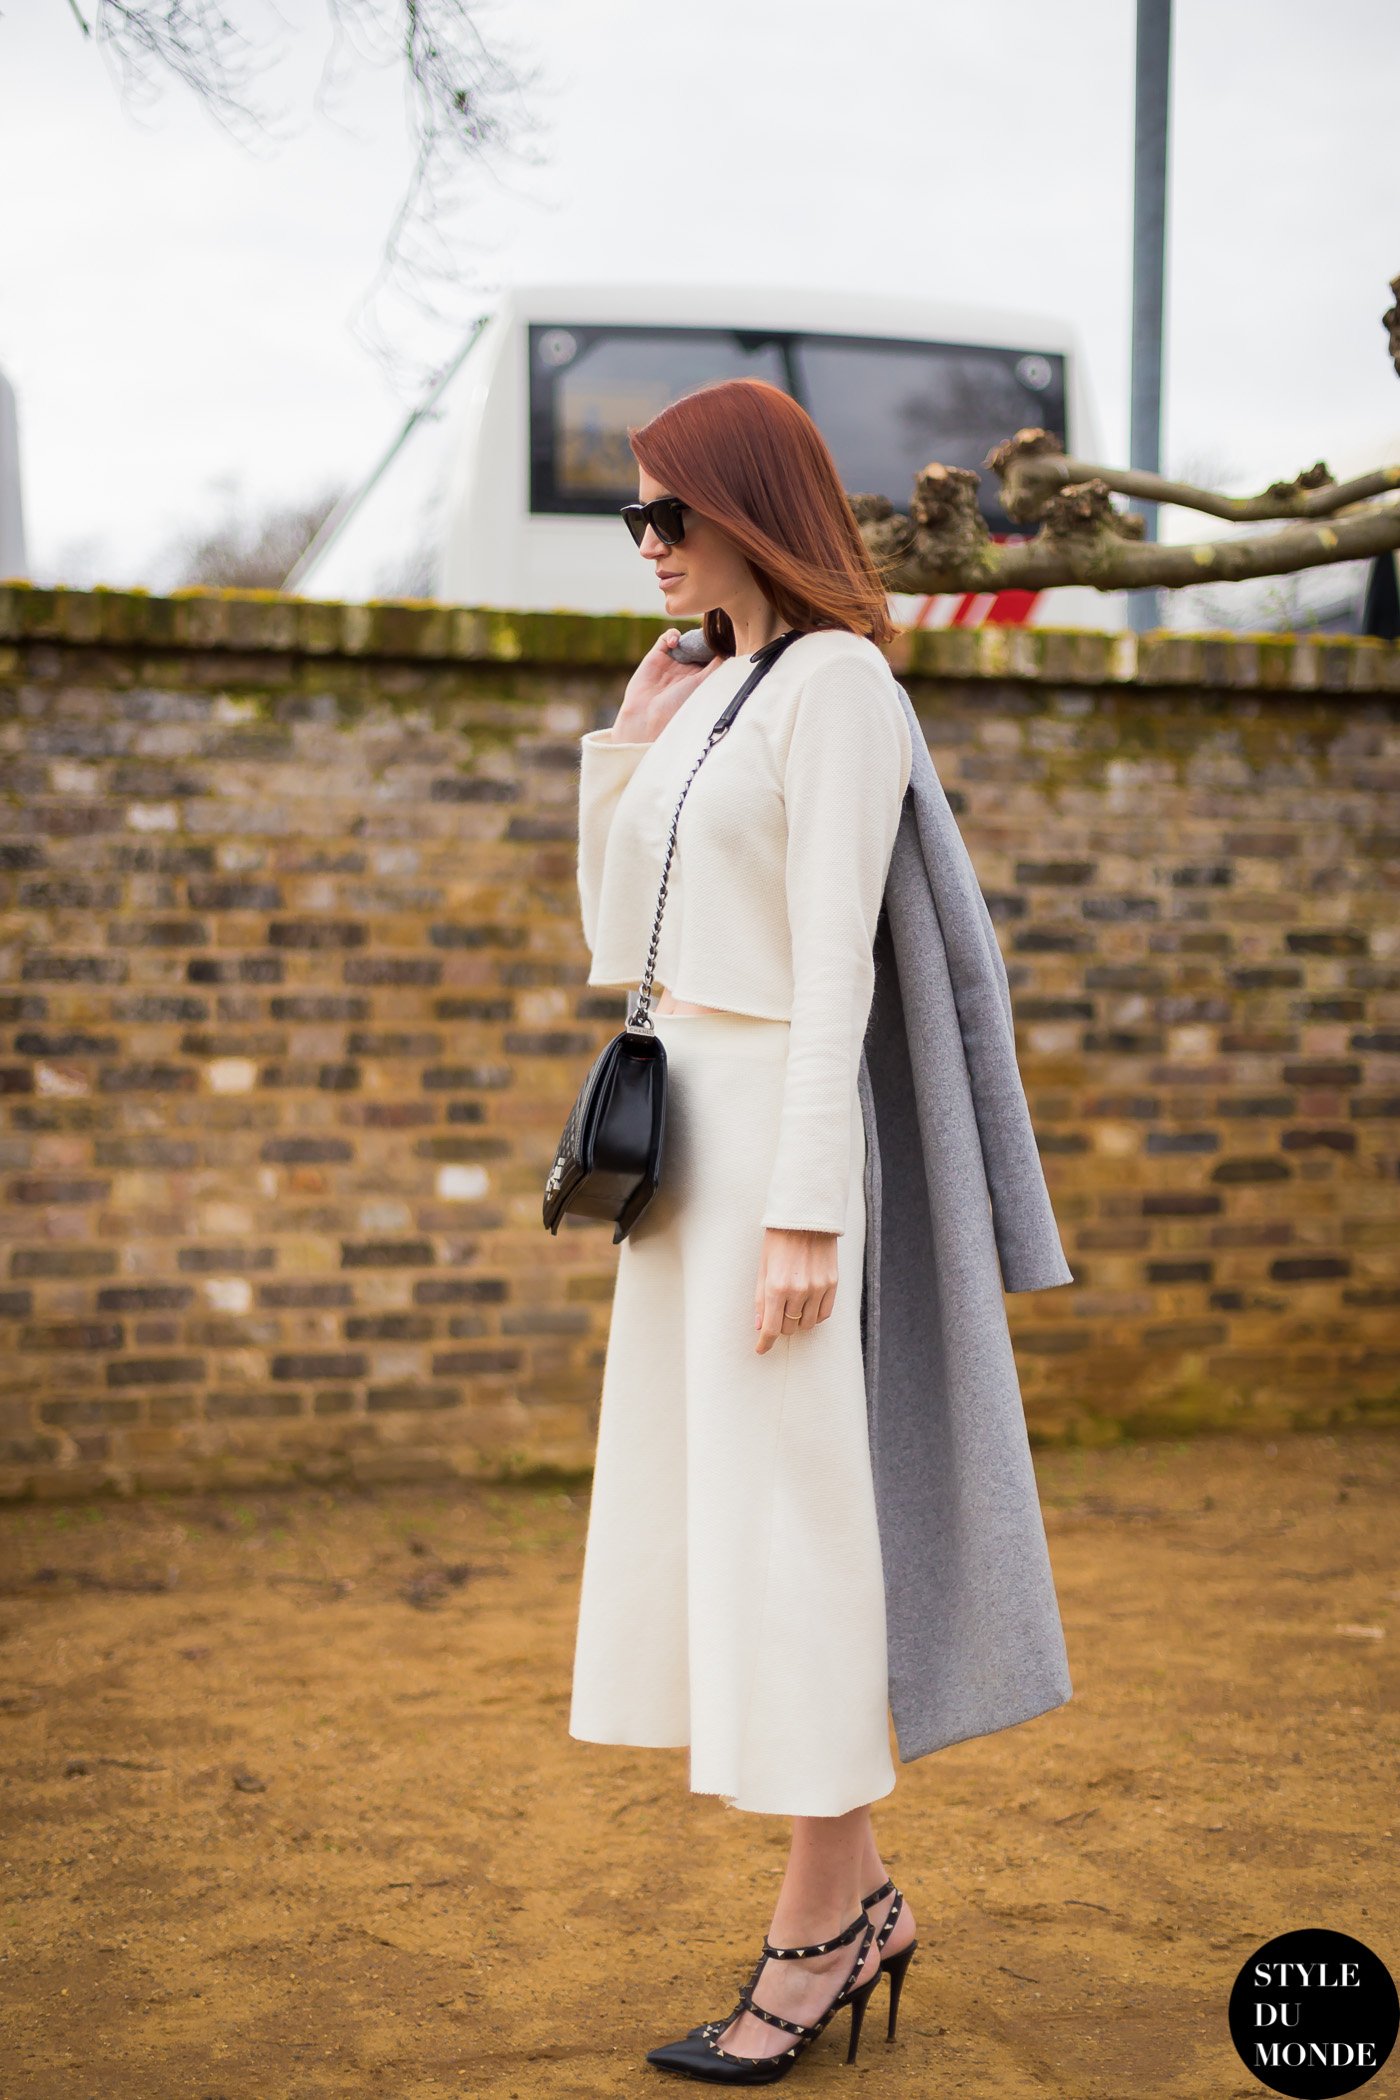 London Fashion Week FW 2014 Street Style: After Burberry - STYLE DU